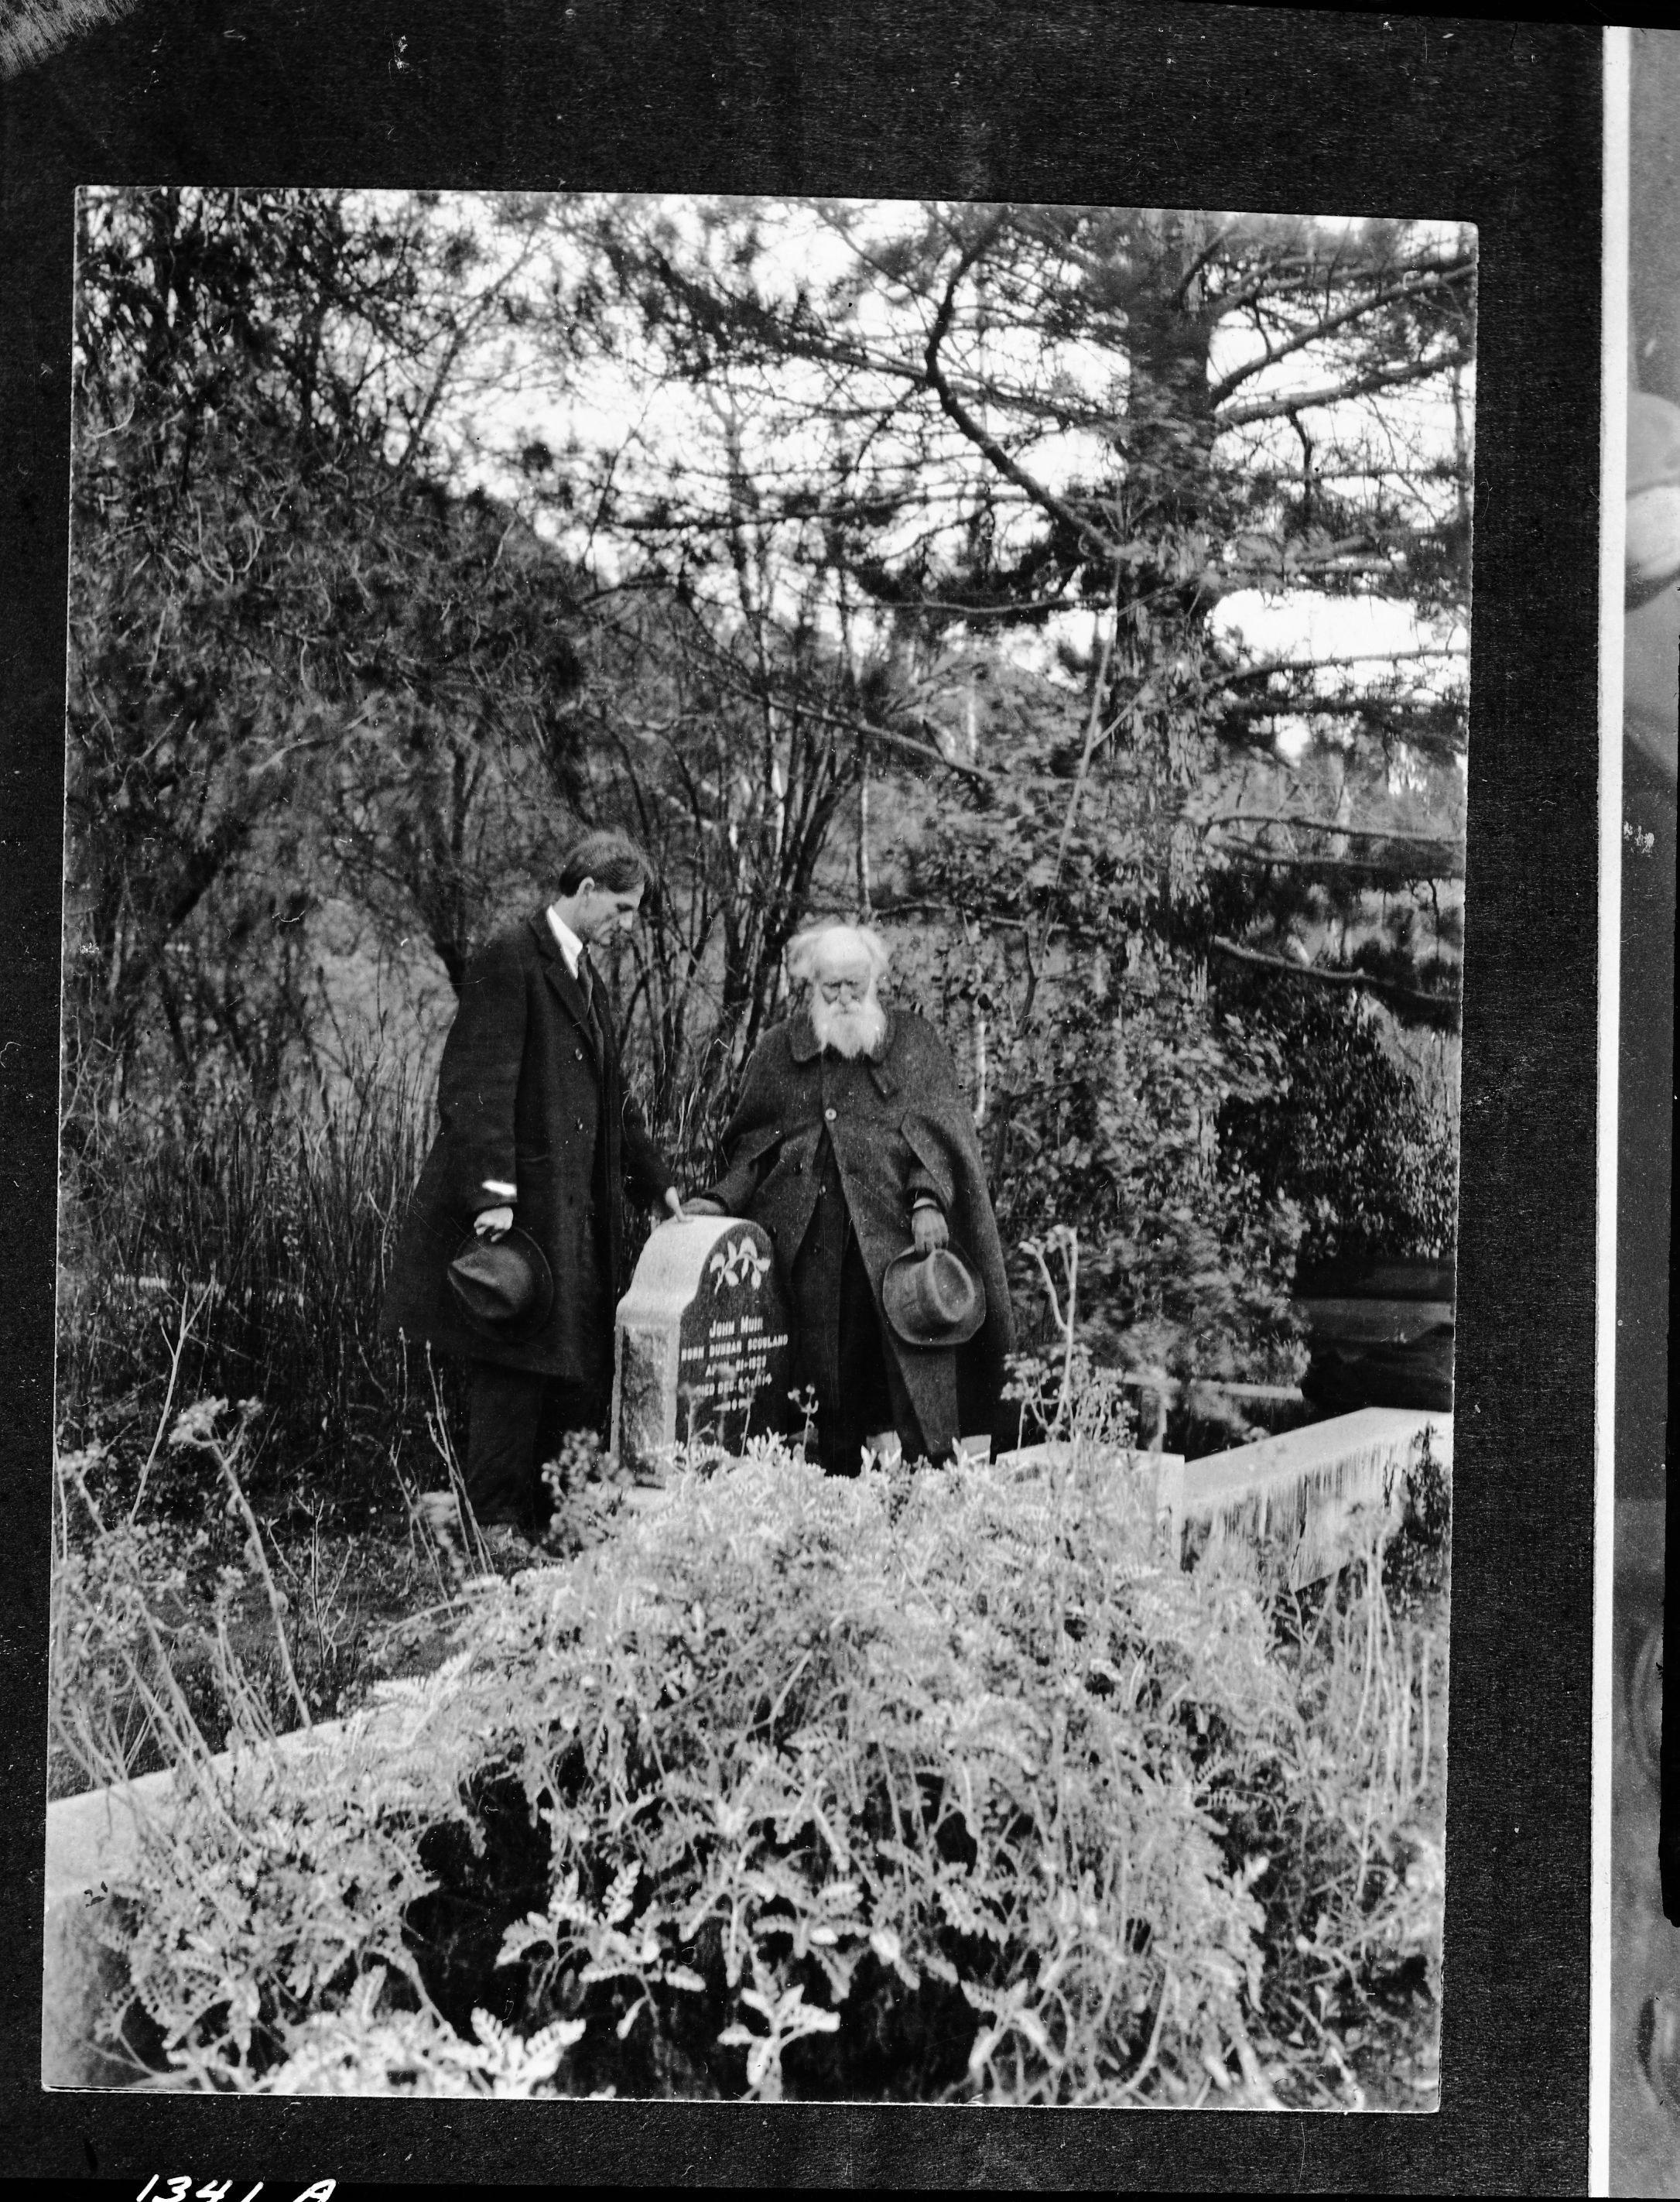 John Burroughs [right] and Charles Keeler [left] at Muir's grave. At Alhambra [Valley].